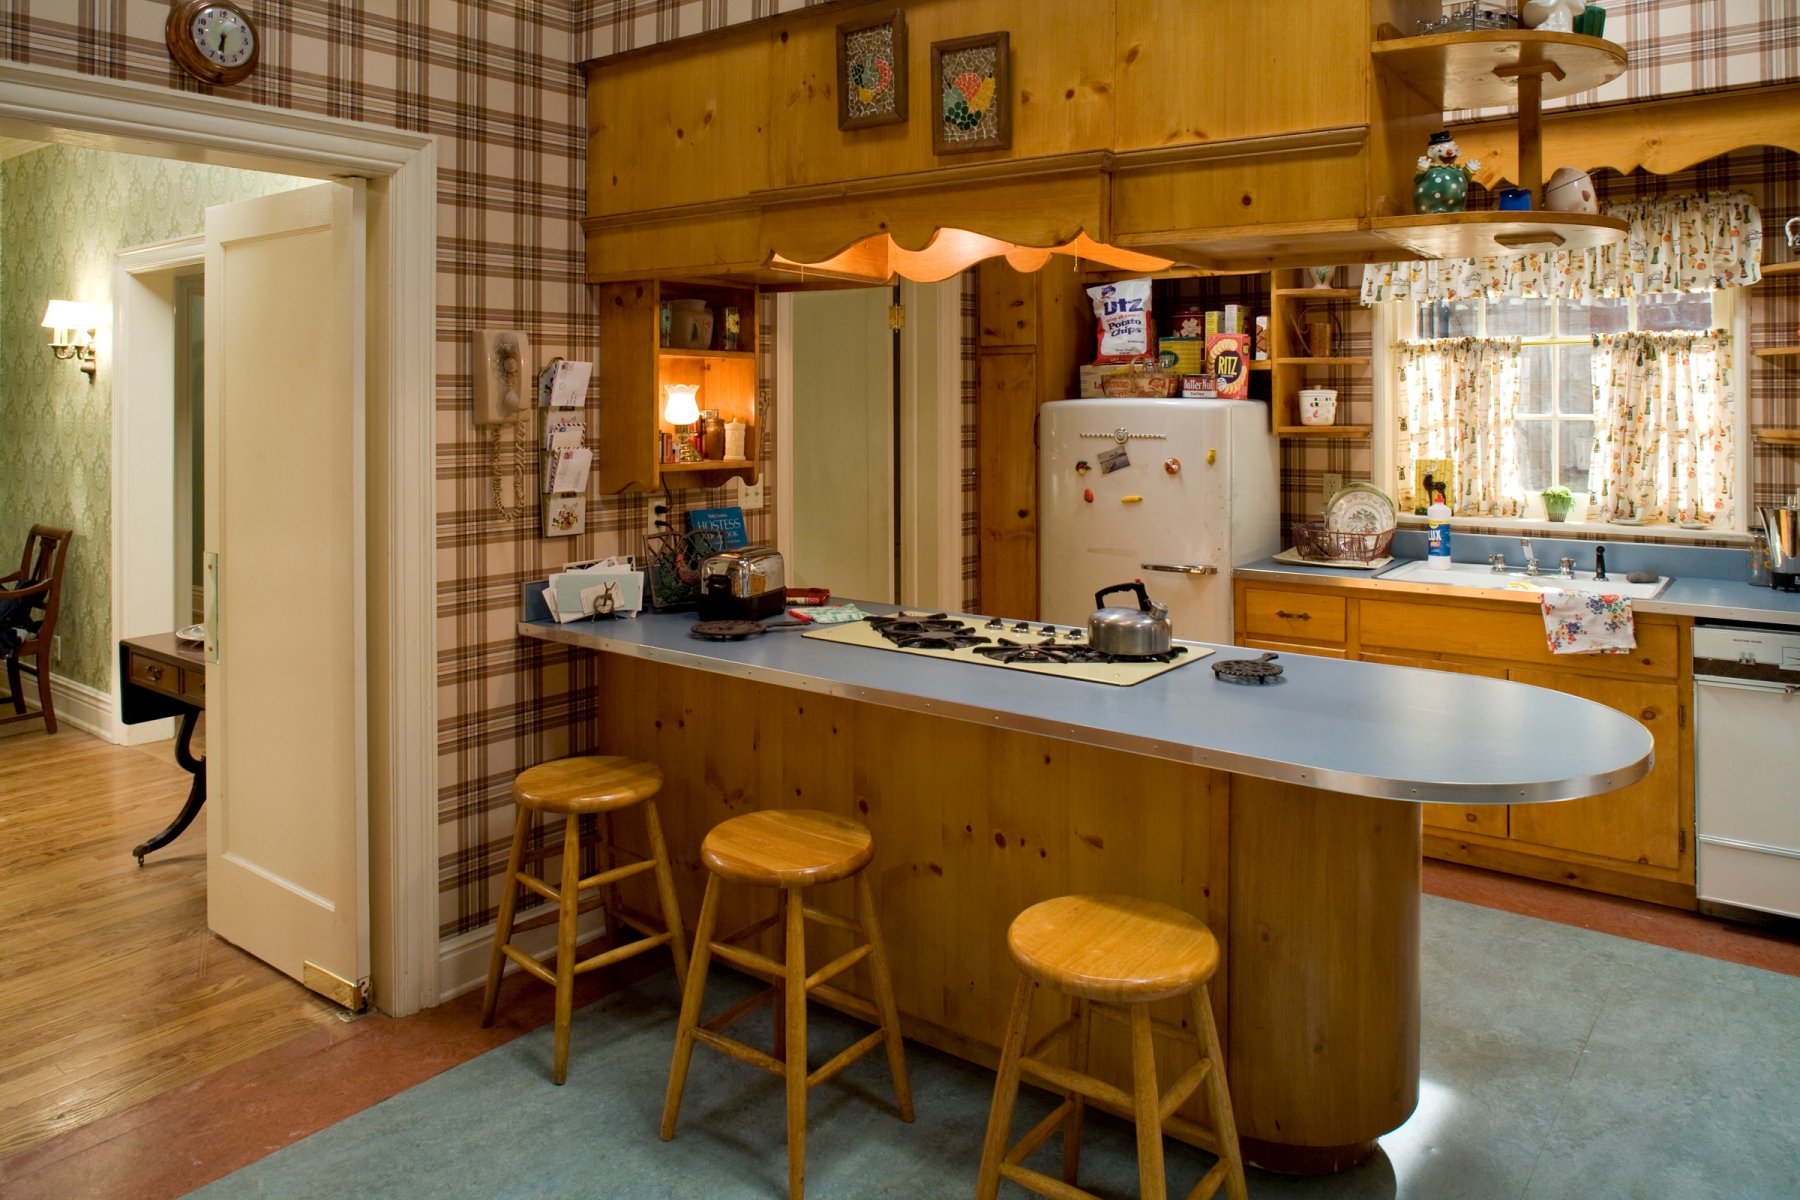 The Draper kitchen, one of the rooms carefully recreated in the museum's exhibition. Credit: Carin Baer/AMC